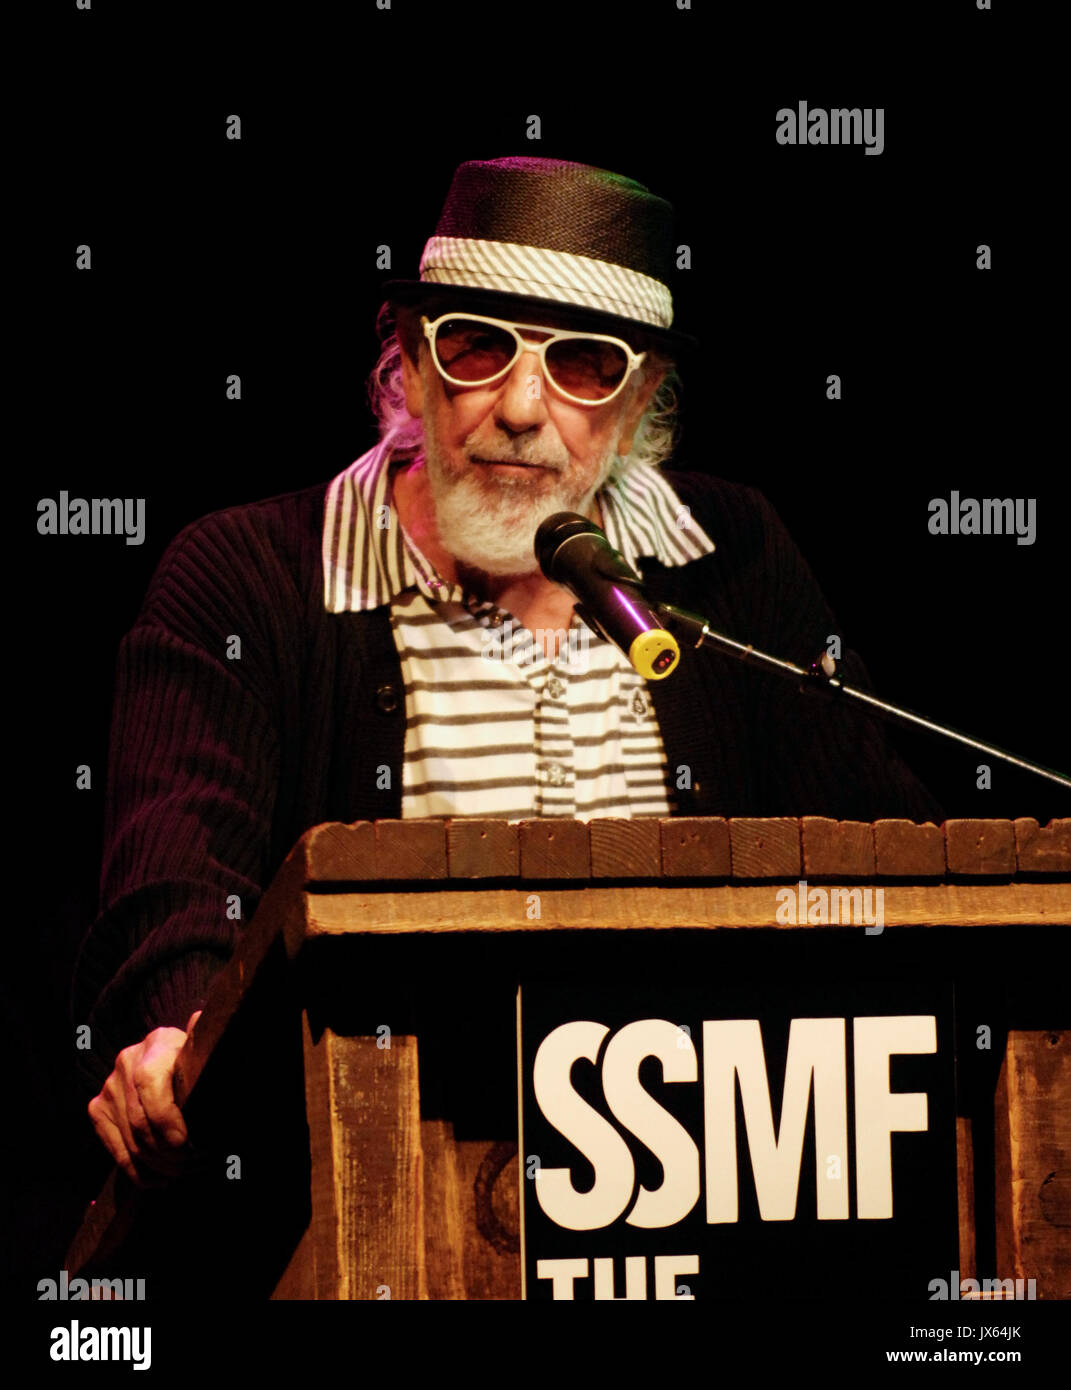 Lou Adler 2° tributo annuale del Sunset Strip Music Festival a Ozzy Osbourne House Blues settembre 10,2009 West Hollywood Foto Stock